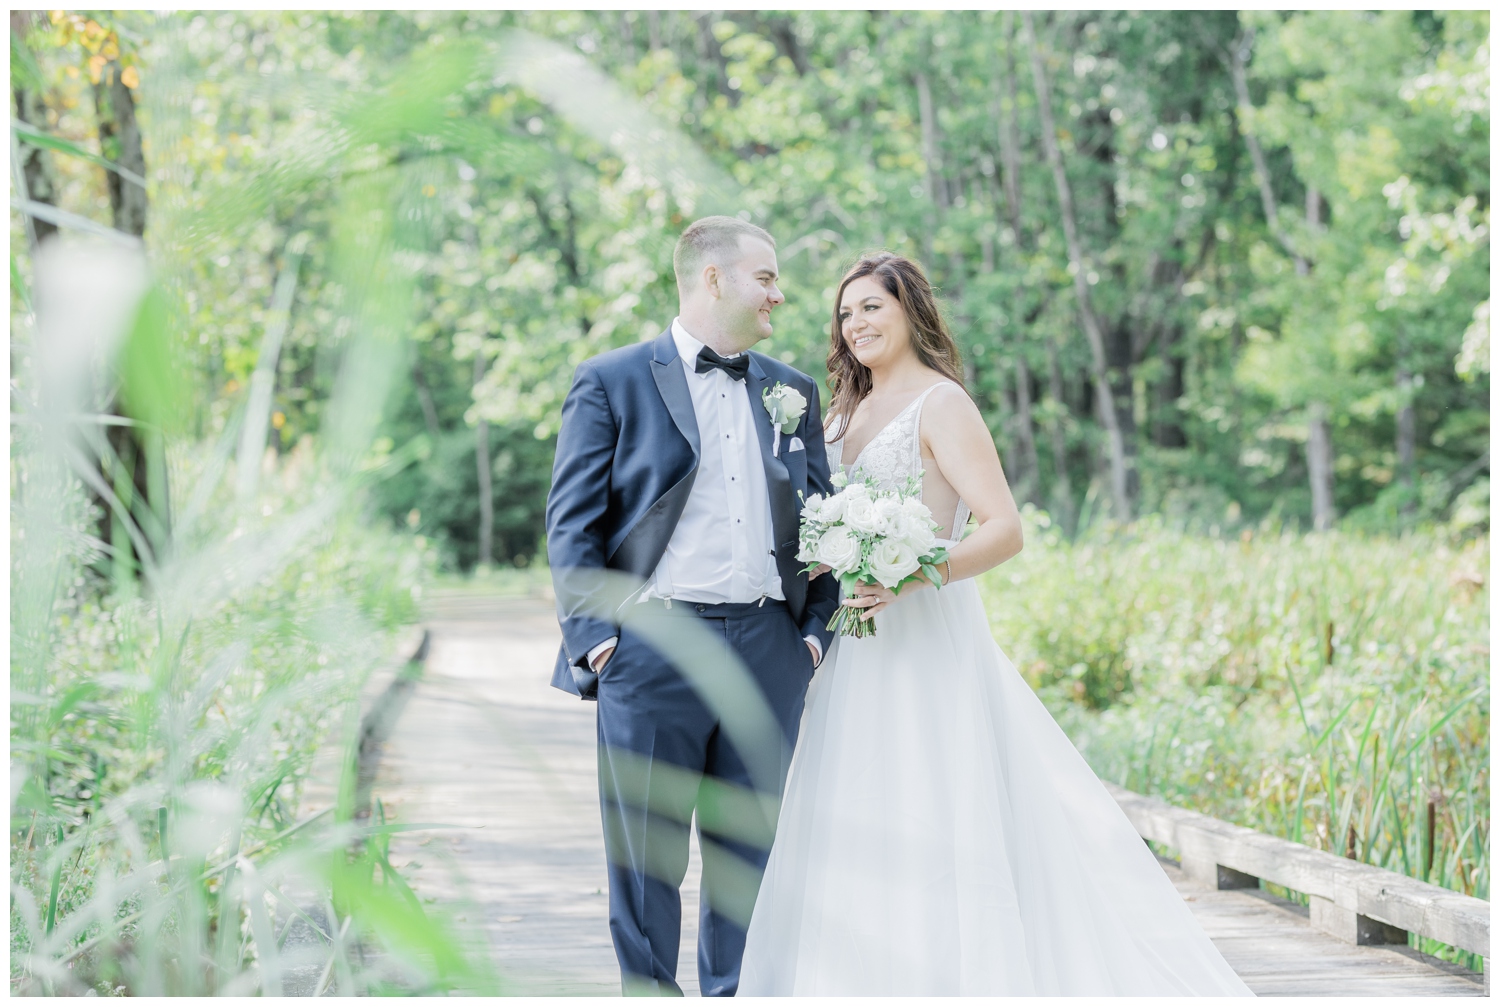 Wedding photograph at Saratoga National Golf Course on a bride in a light and airy style